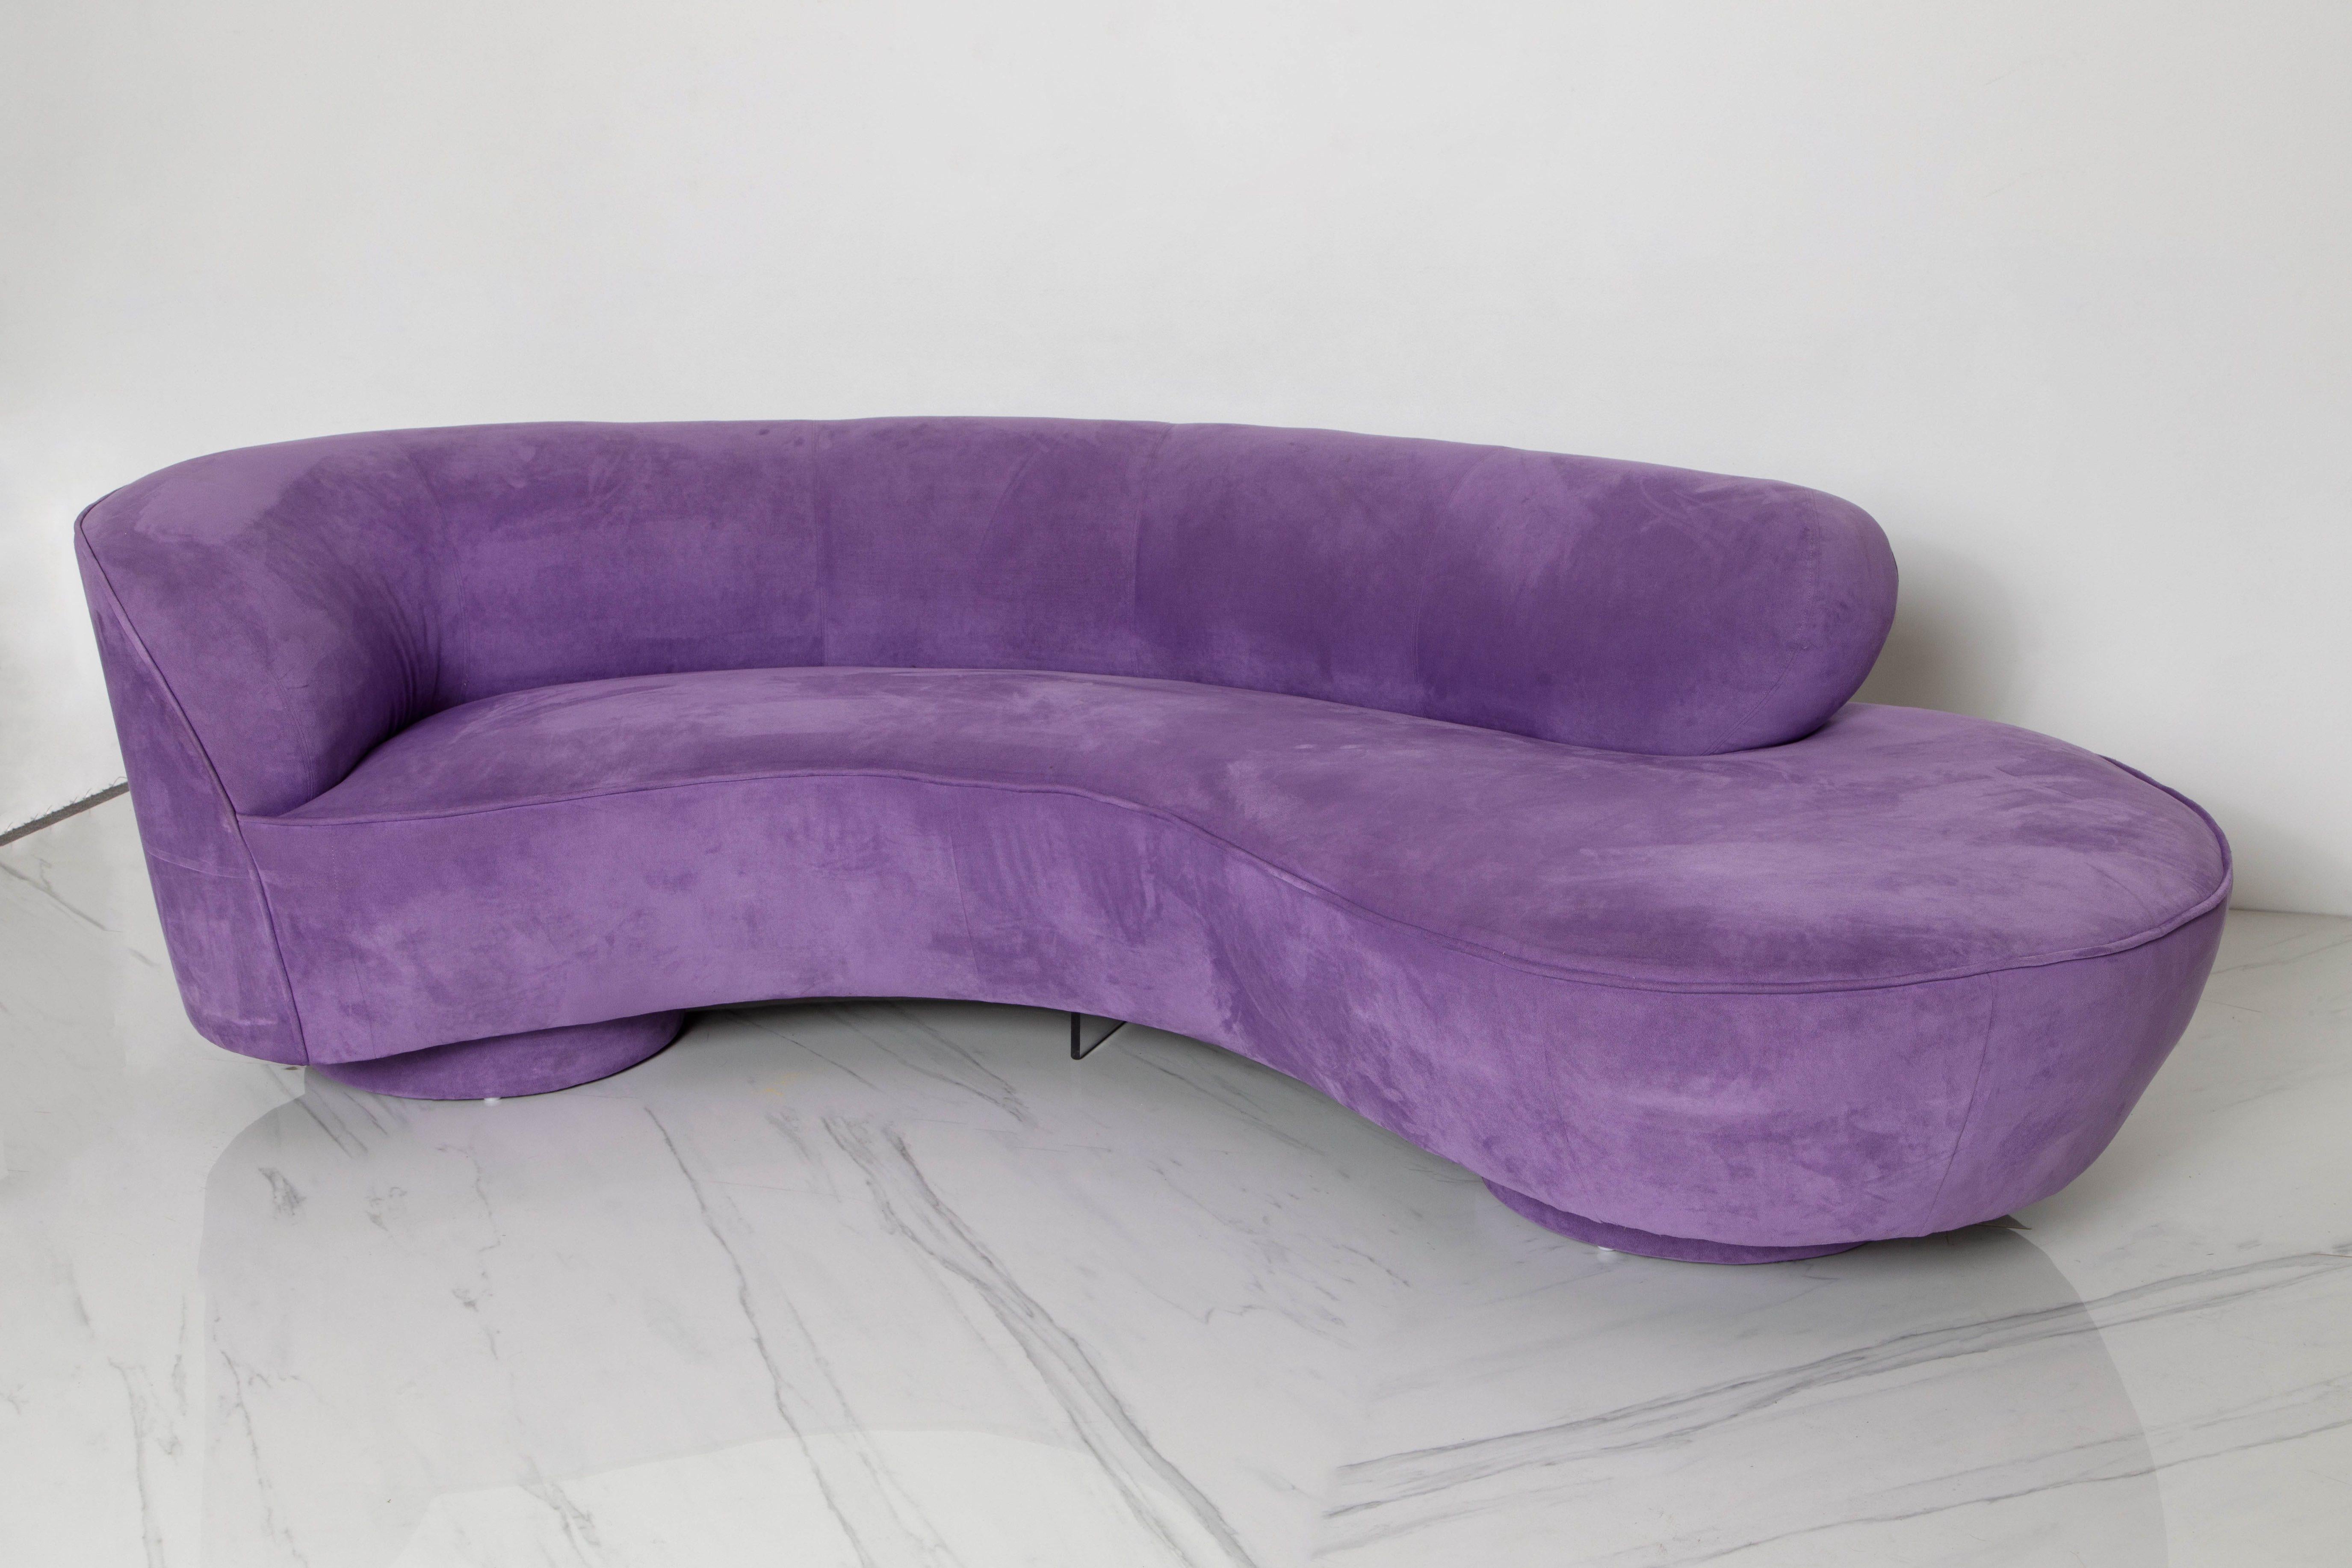 Modern 'Cloud' Sofa by Vladimir Kagan for Directional w Lucite Leg, 1980s, Signed